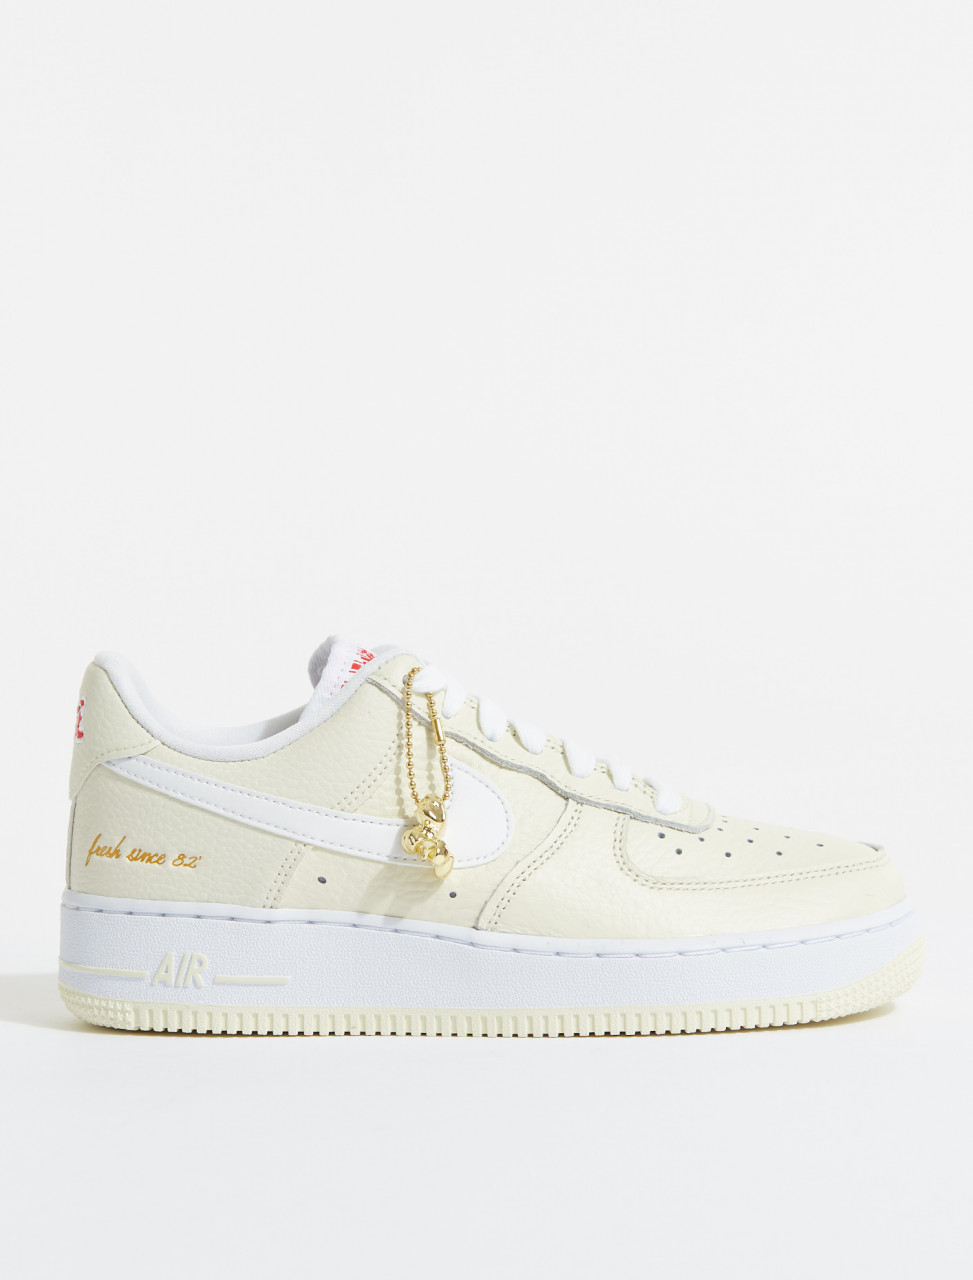 Nike Air Force 1 '07 PRM in Coconut 